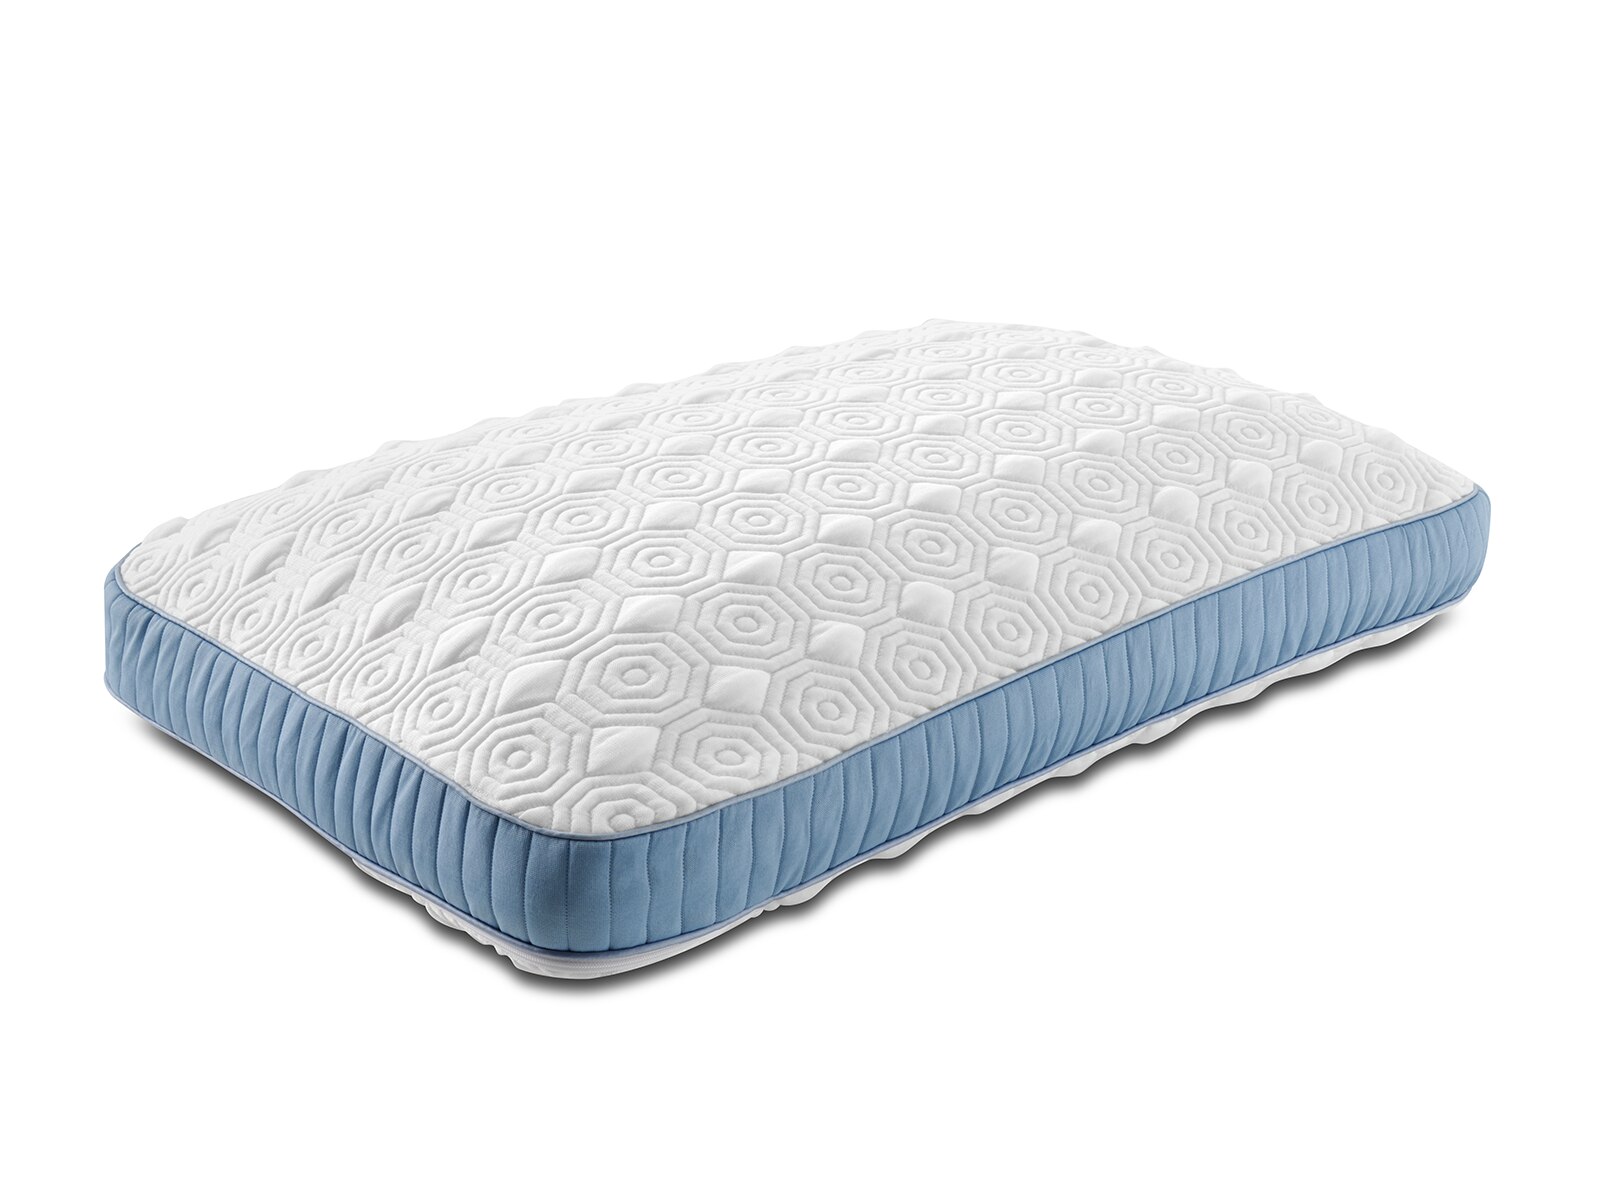 stearns and foster luxury latex mattress reviews